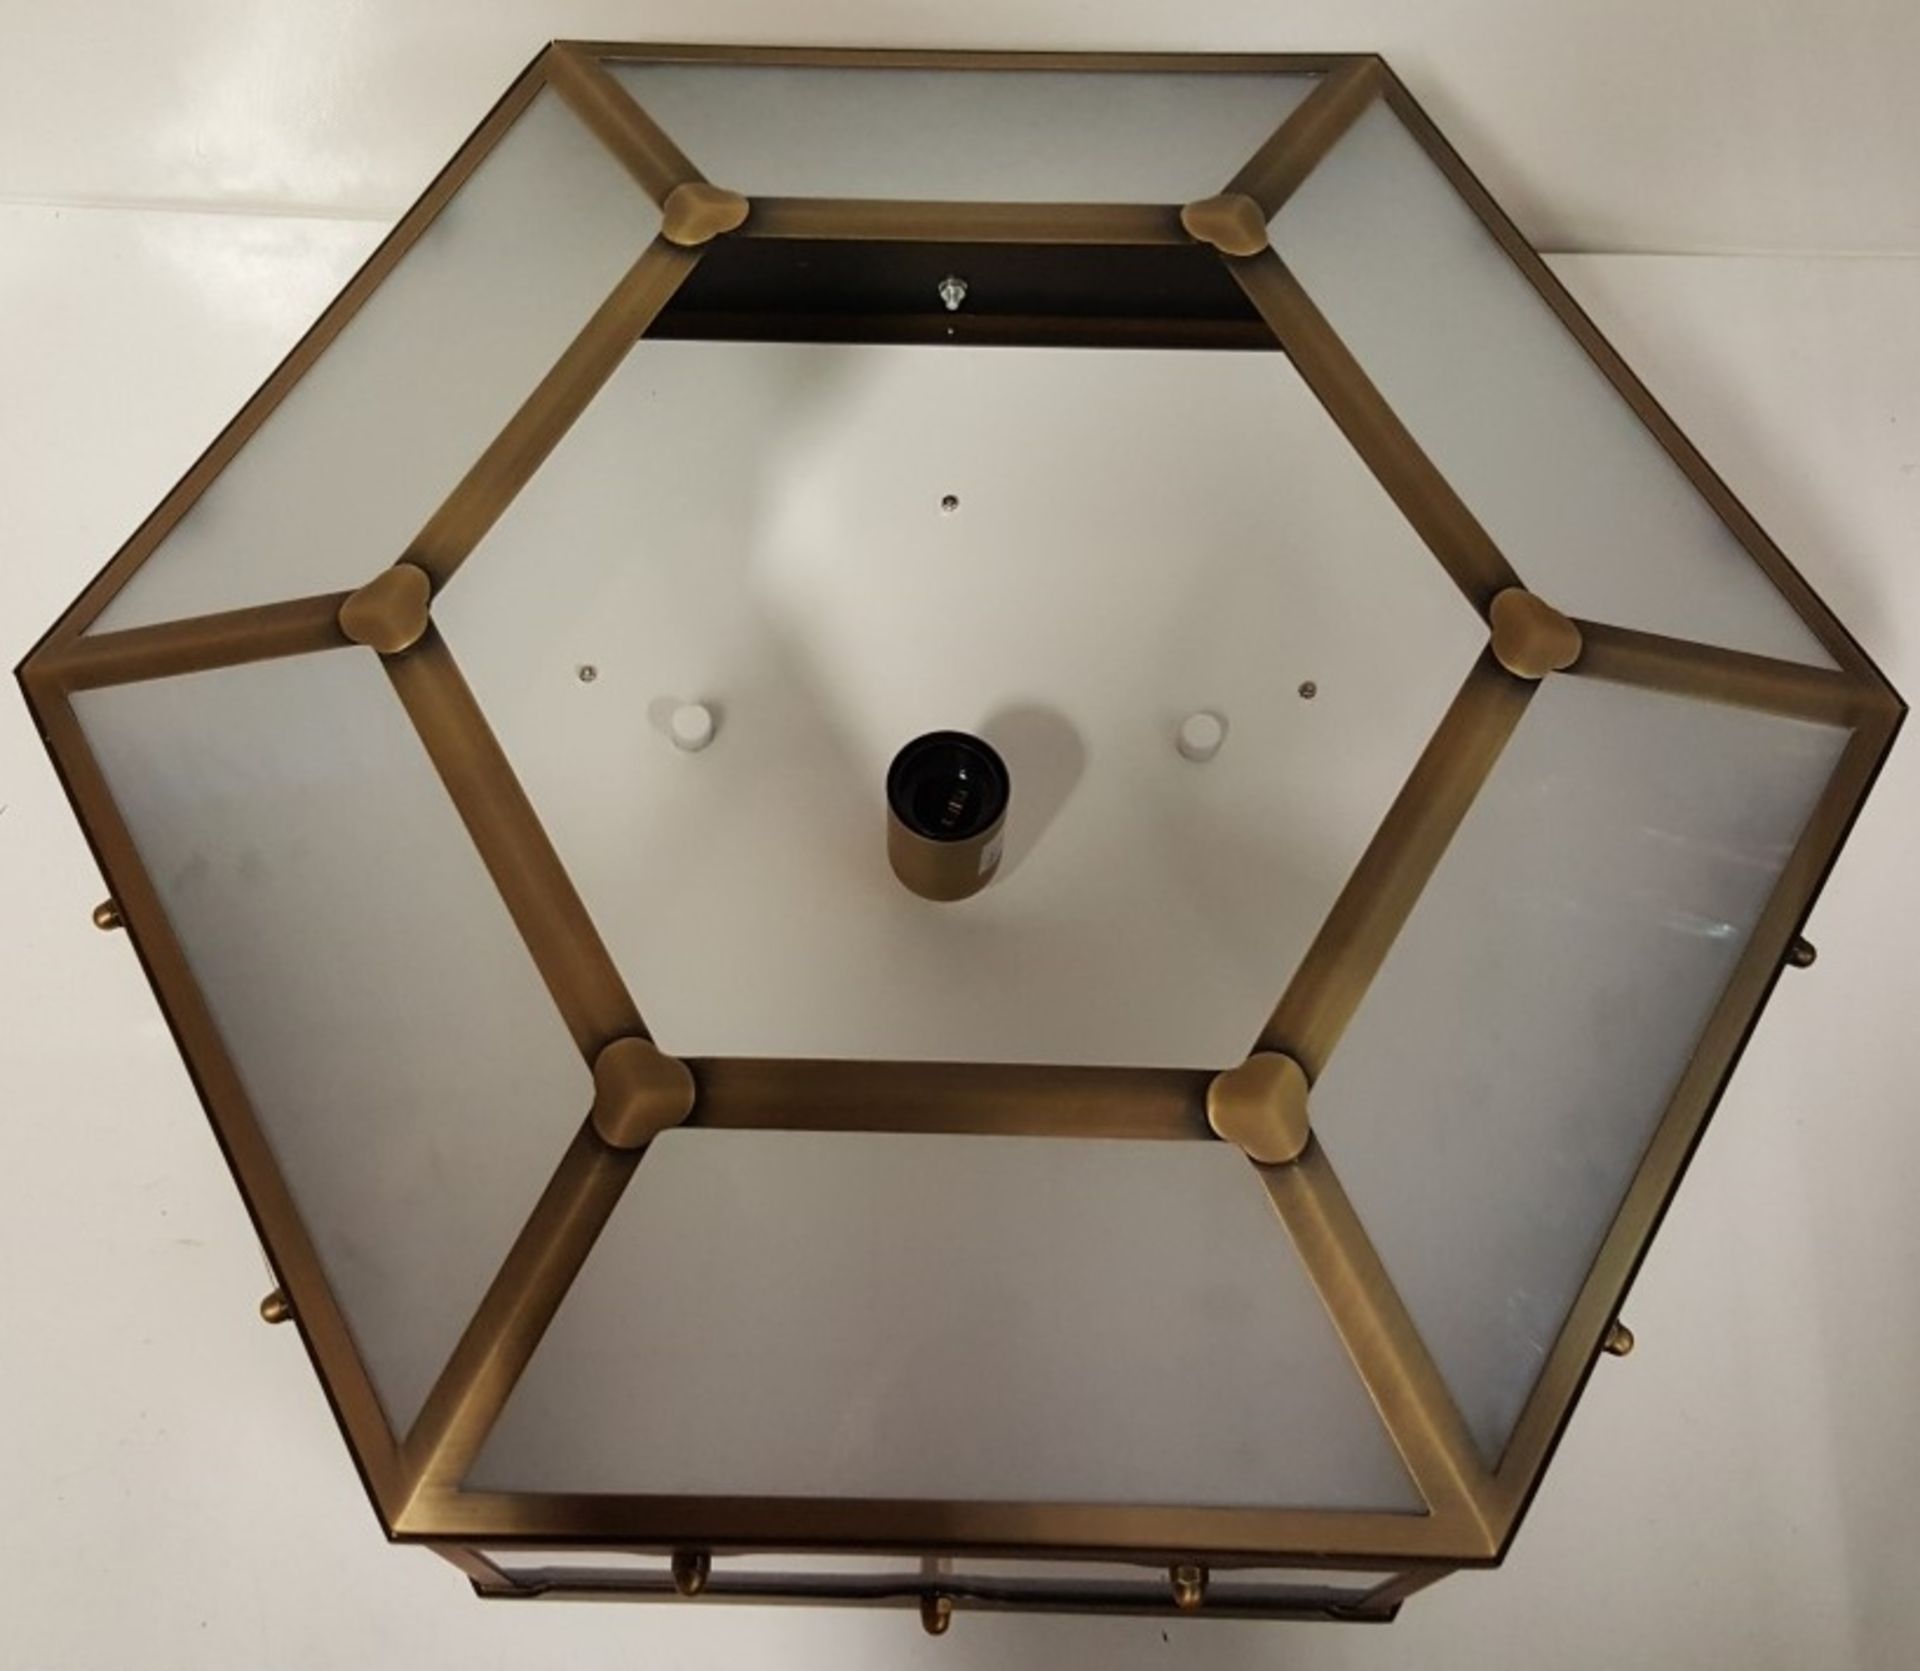 1 x Chelsom Flush Fitting Hexagonal Shaped Light Fitting In A Antique Brass Finish - REF:J2373 - Image 5 of 7